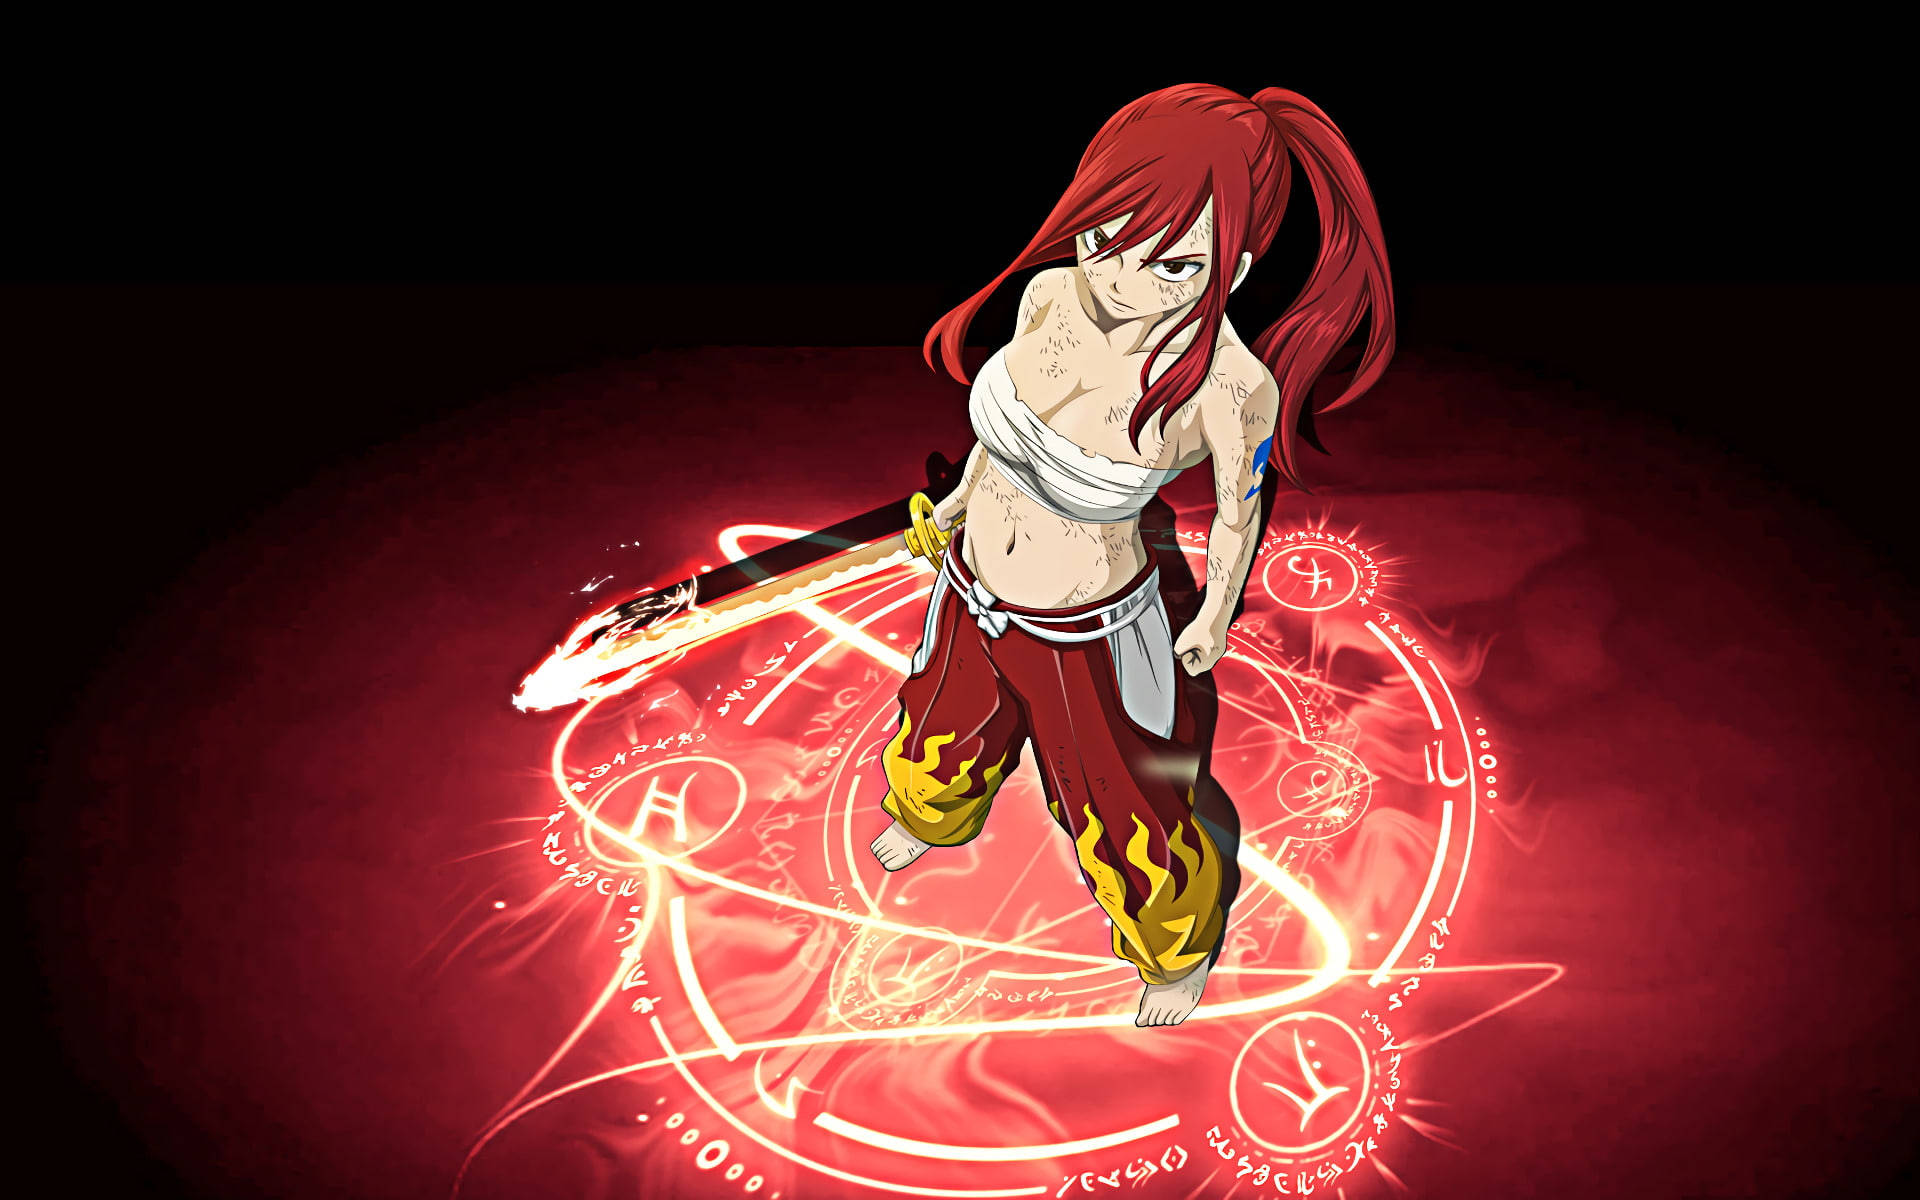 Caption: Fairy Tail's Fearless Warrior - Erza Scarlet Background